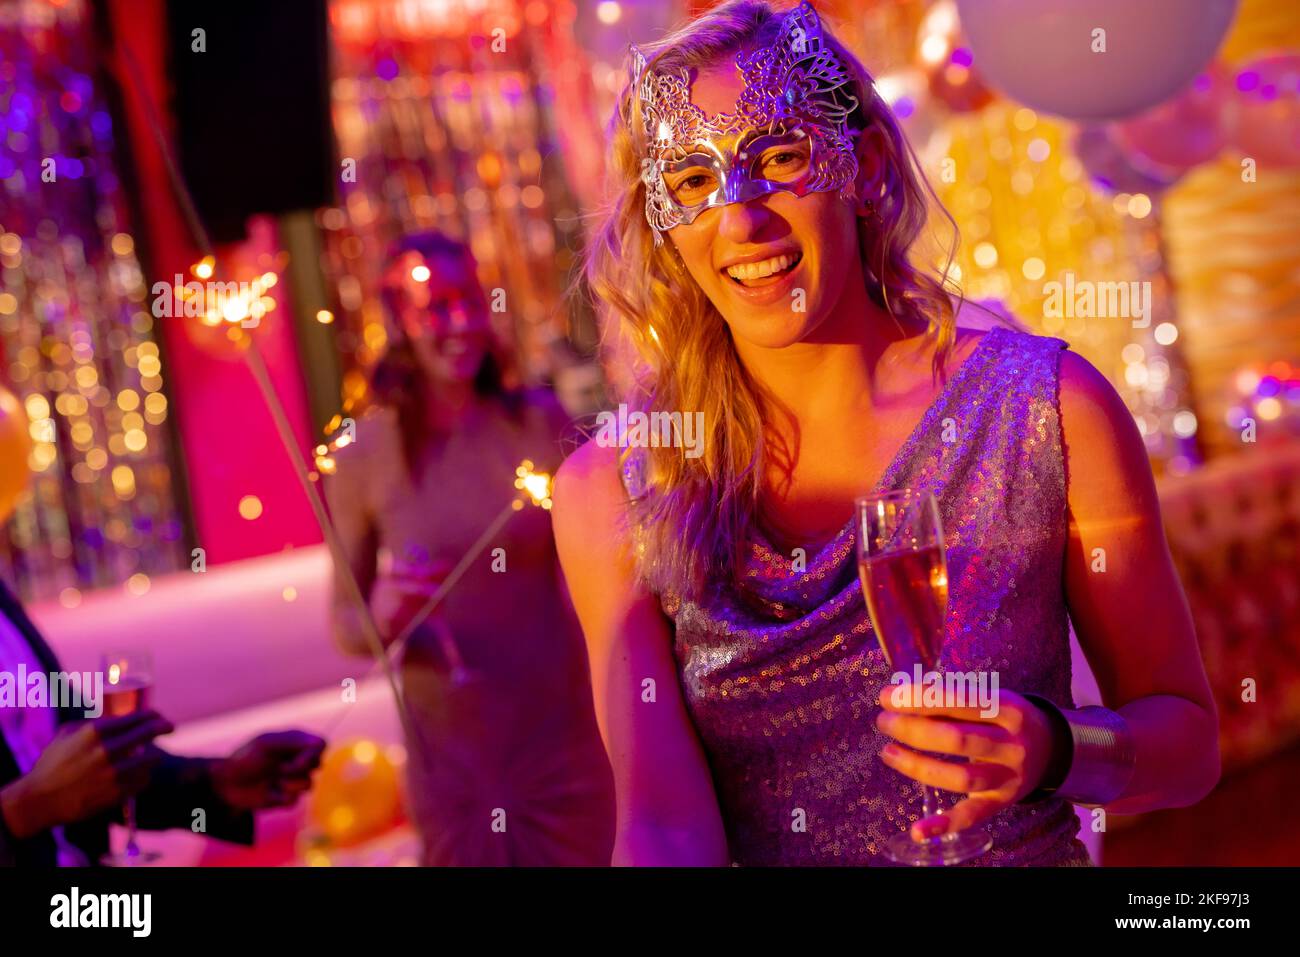 Portrait of smiling caucasian woman in mask holding glass of champagne at a party in a nightclub. Fun, going out, celebrating and party concept. Stock Photo